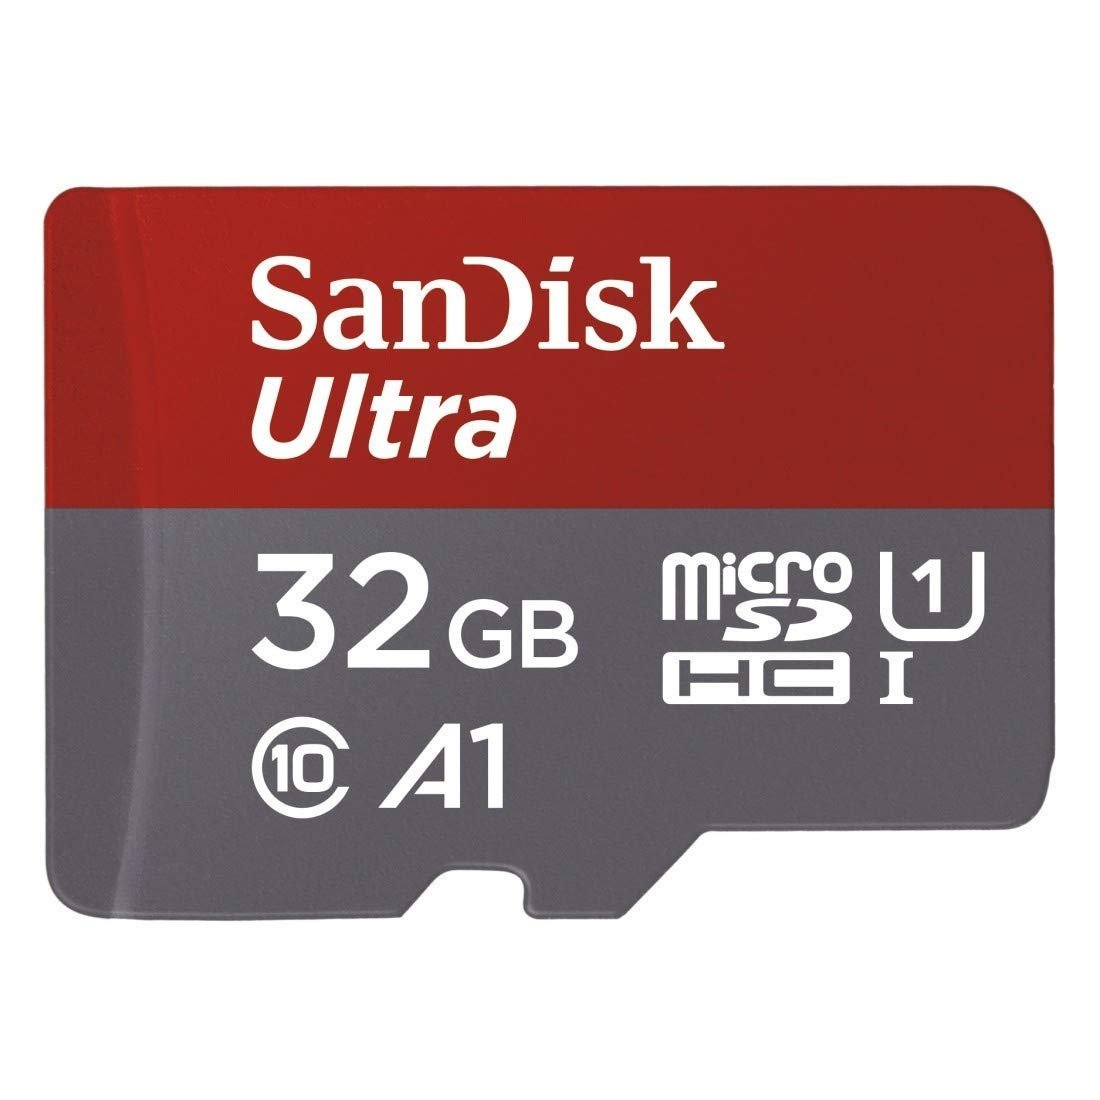 Sandisk Sdsdhc 32Gb Class 10 Memory Card